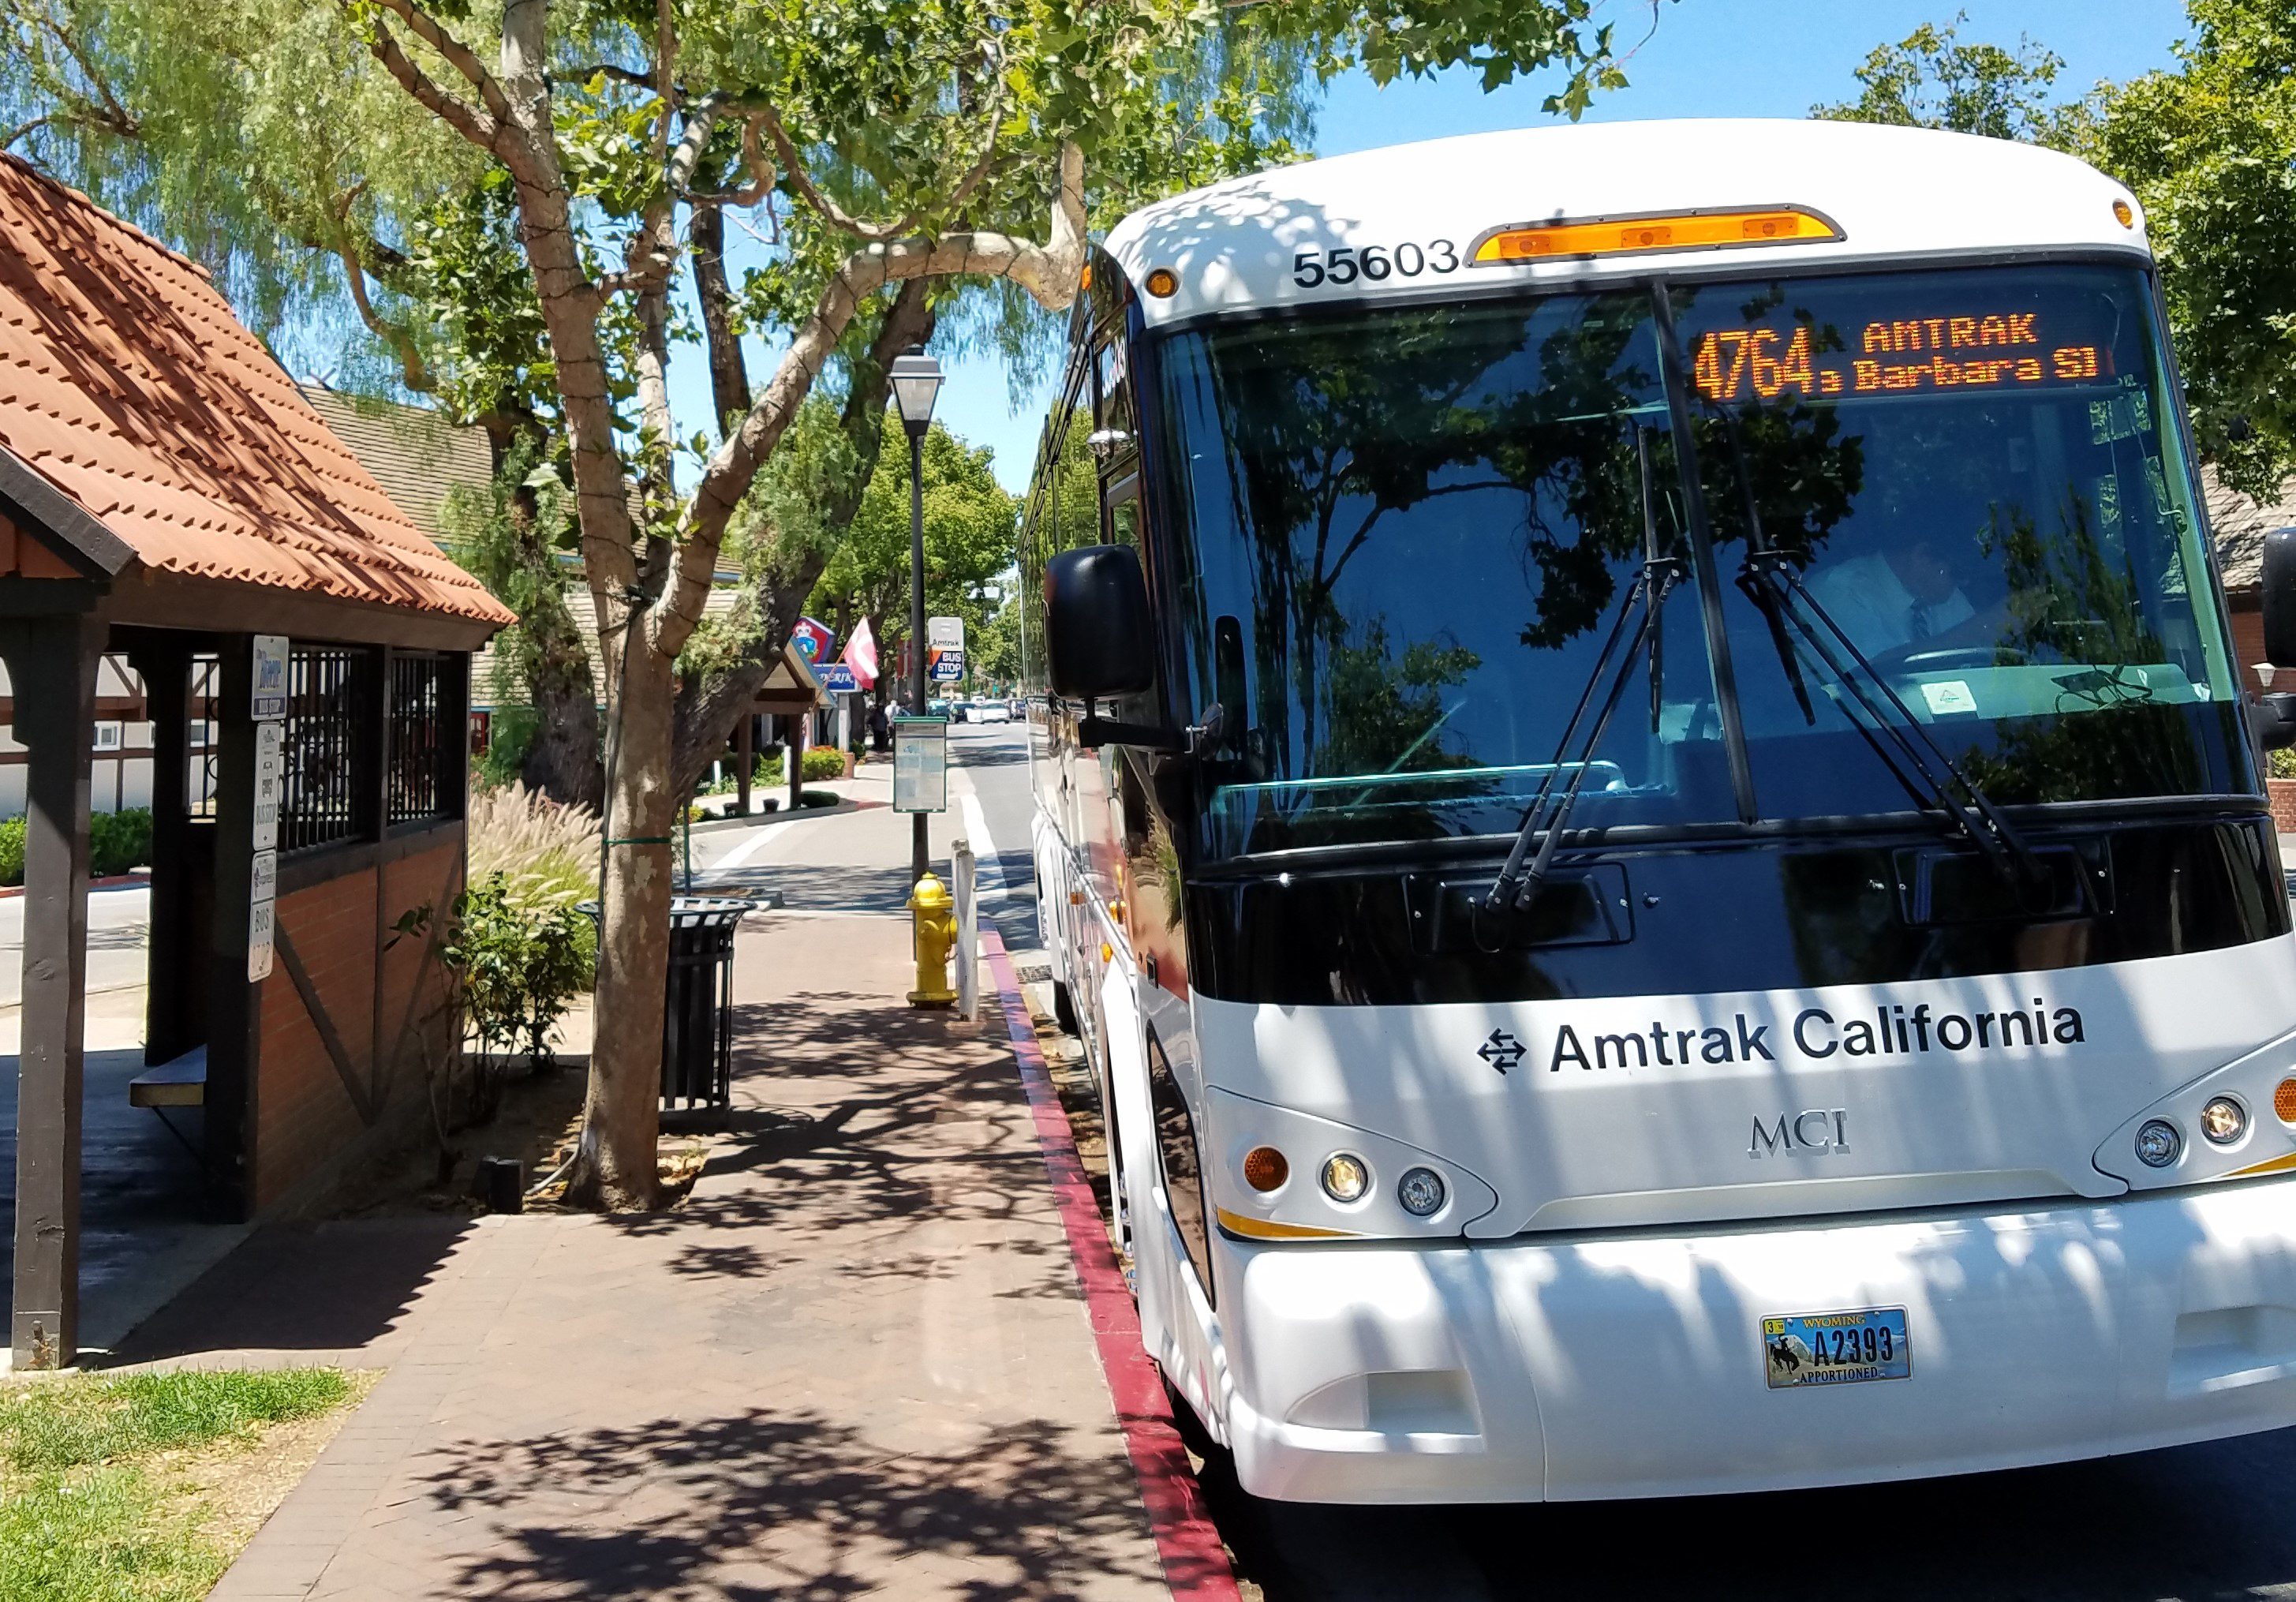 Train-riding tourists can get discounts in Solvang